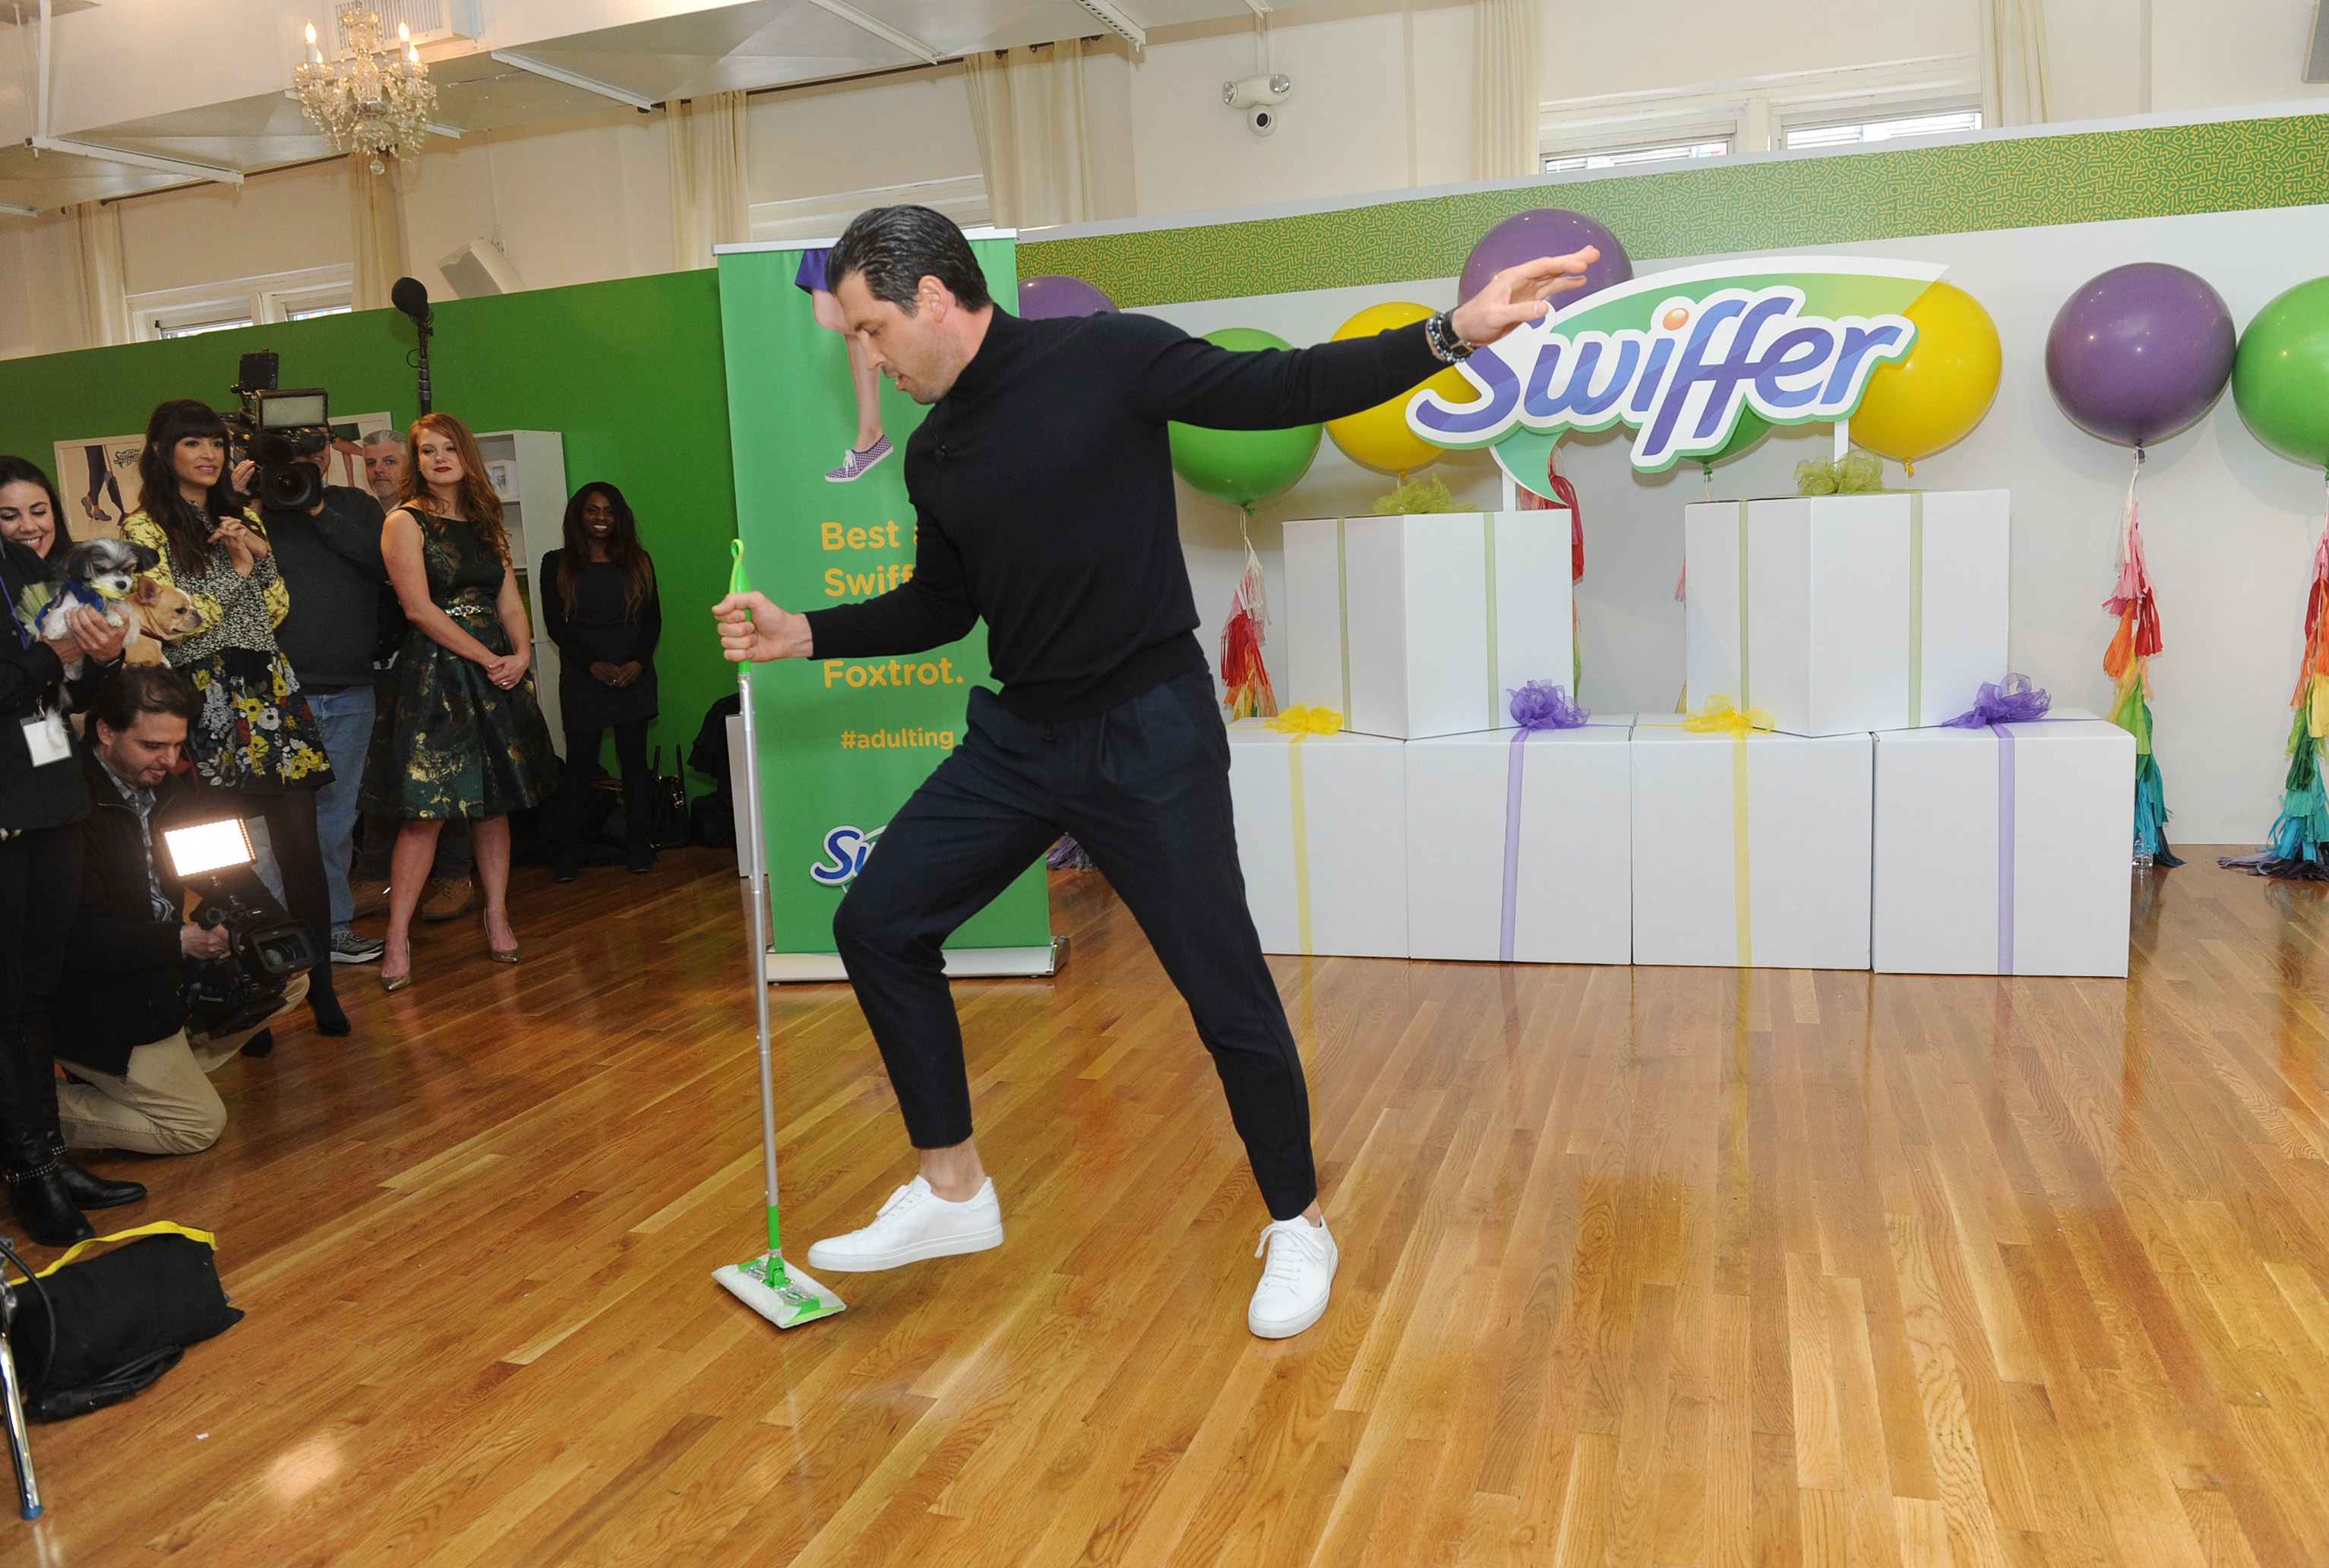 actress in swiffer duster commercial